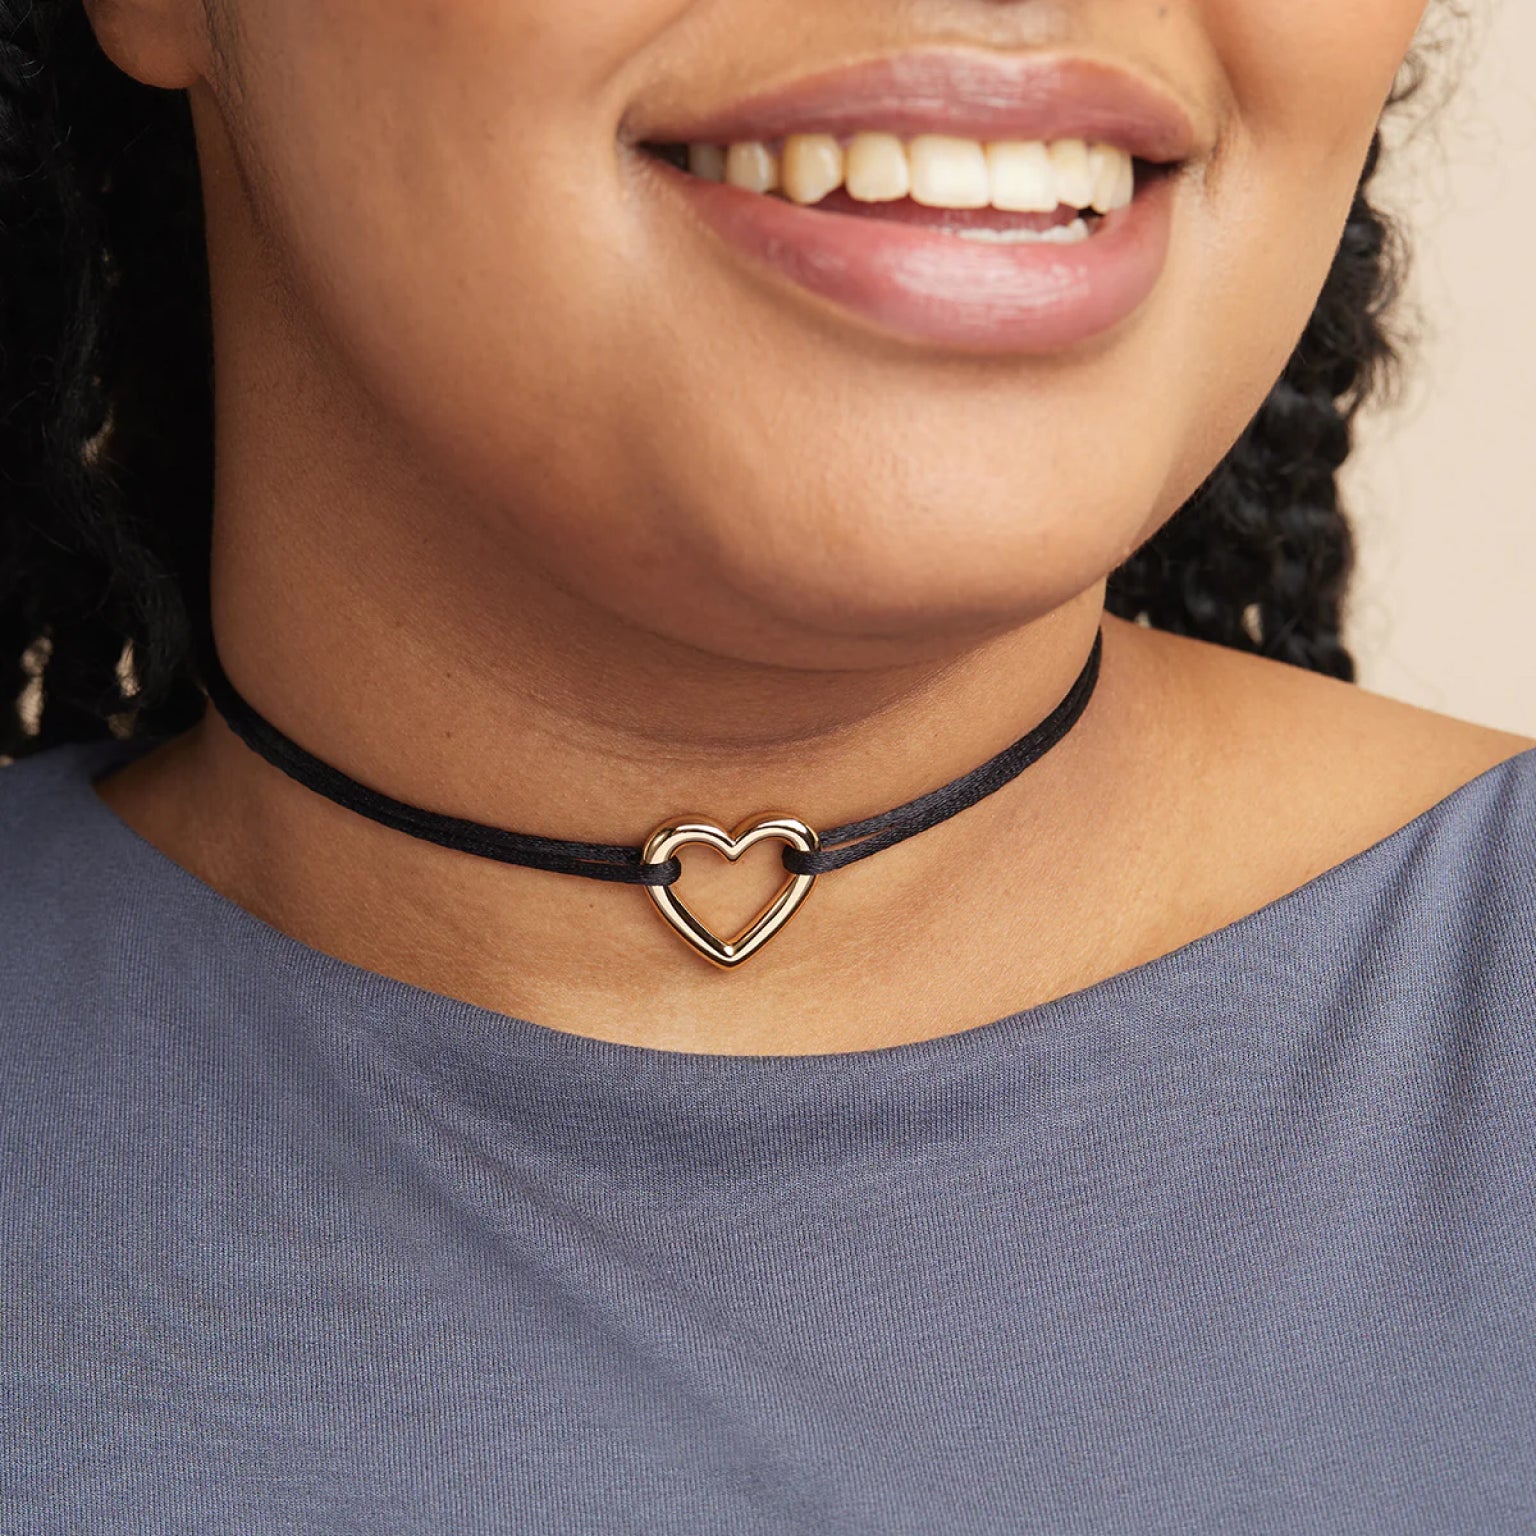 Moonglow Nike Choker Necklace - Silver